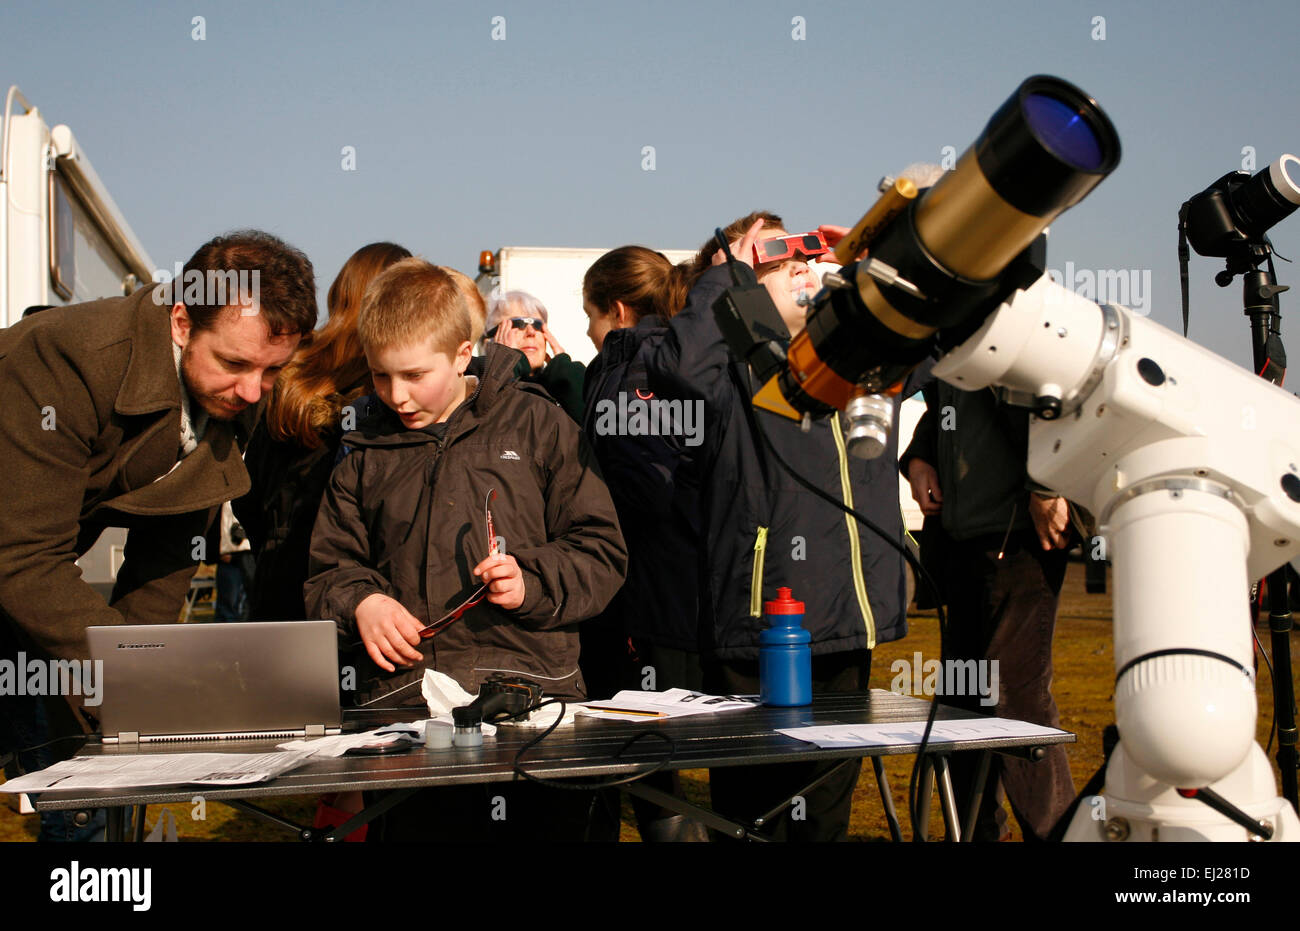 Madley, Herefordshire UK. 20th March, 2015. Amateur astronomers show local school pupils the solar eclipse via a laptop computer linked to a telescope under clear blue skies in rural Herefordshire. Stock Photo